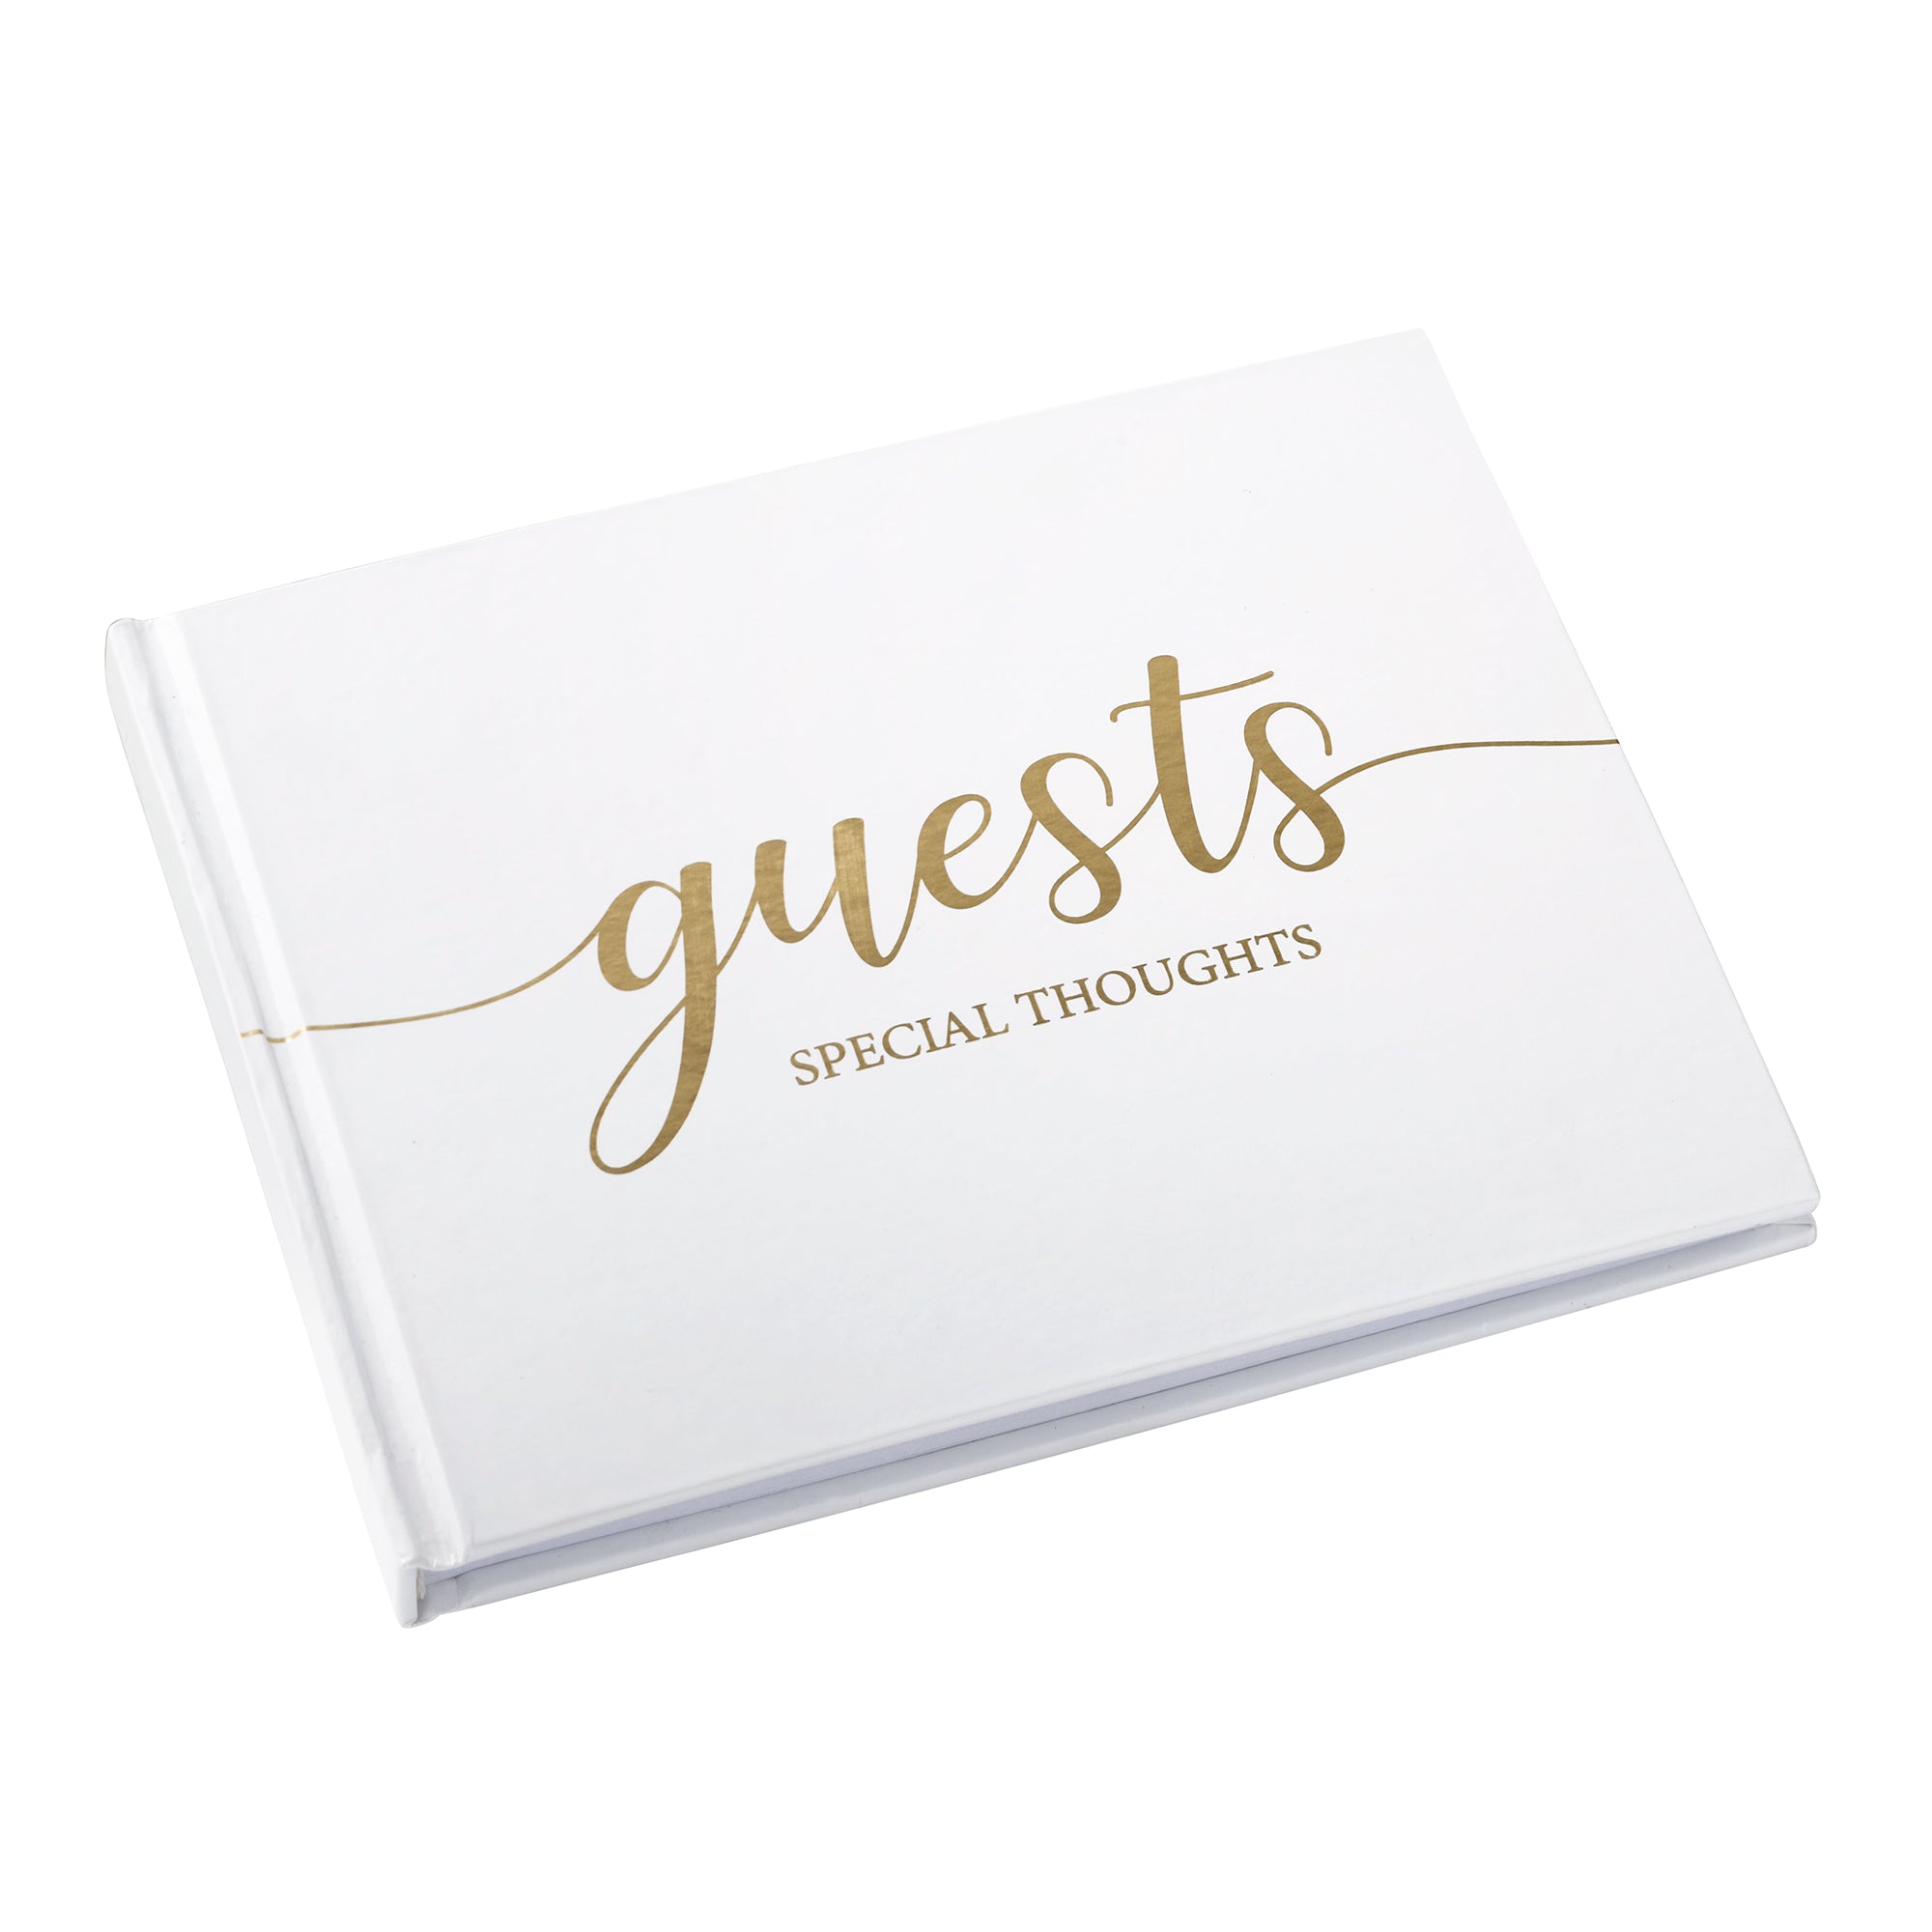 Minimalist Simple Elegant Chic White Wedding Registry Guestbook with Gold Writing